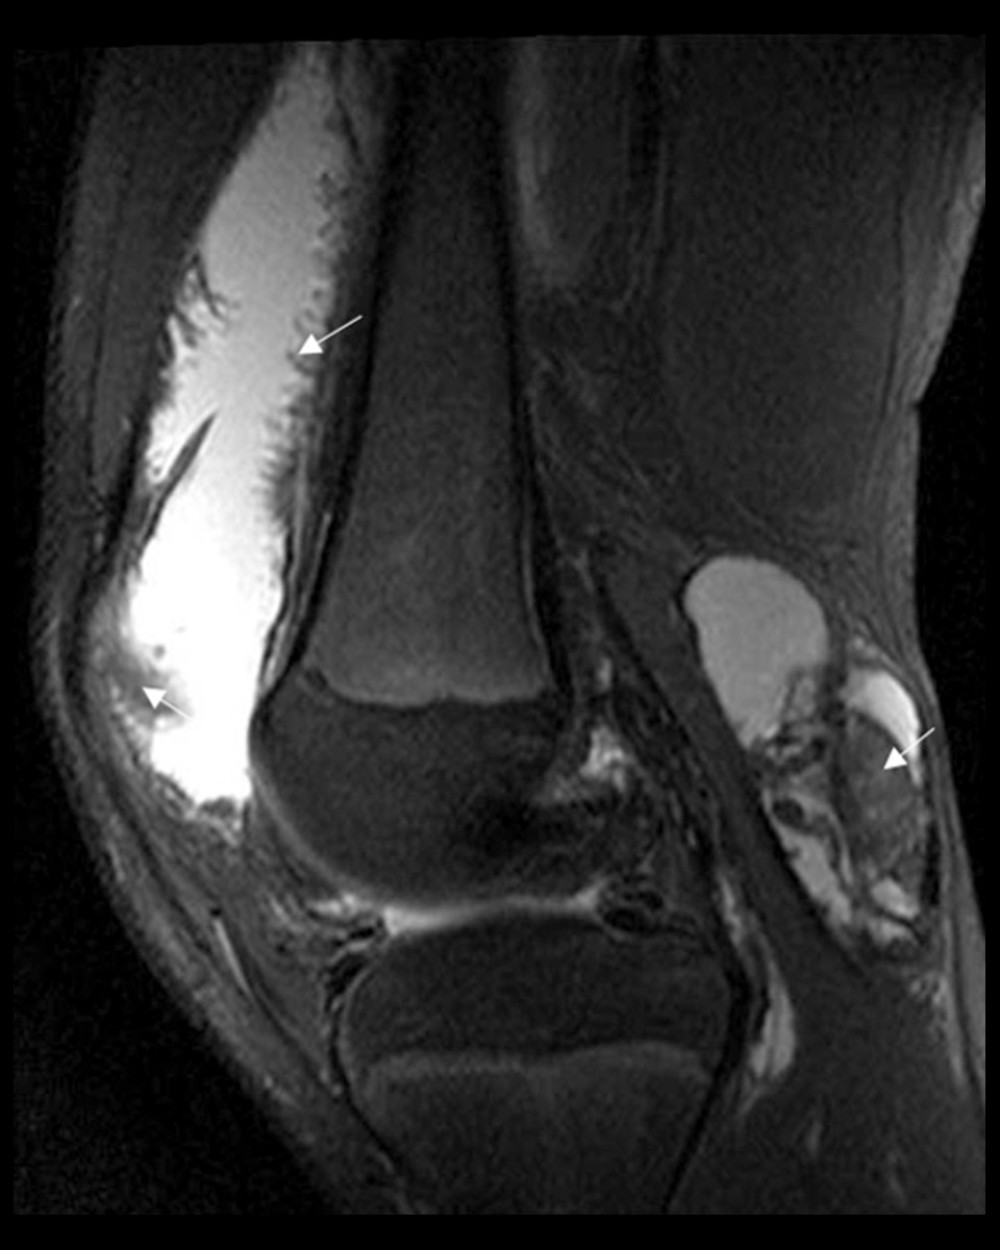 Sagittal proton density MRI of the knee showing large joint effusion with frond-like low signal intensity projections and lobulated masses seen in the suprapatellar recess and popliteal fossa (arrows).